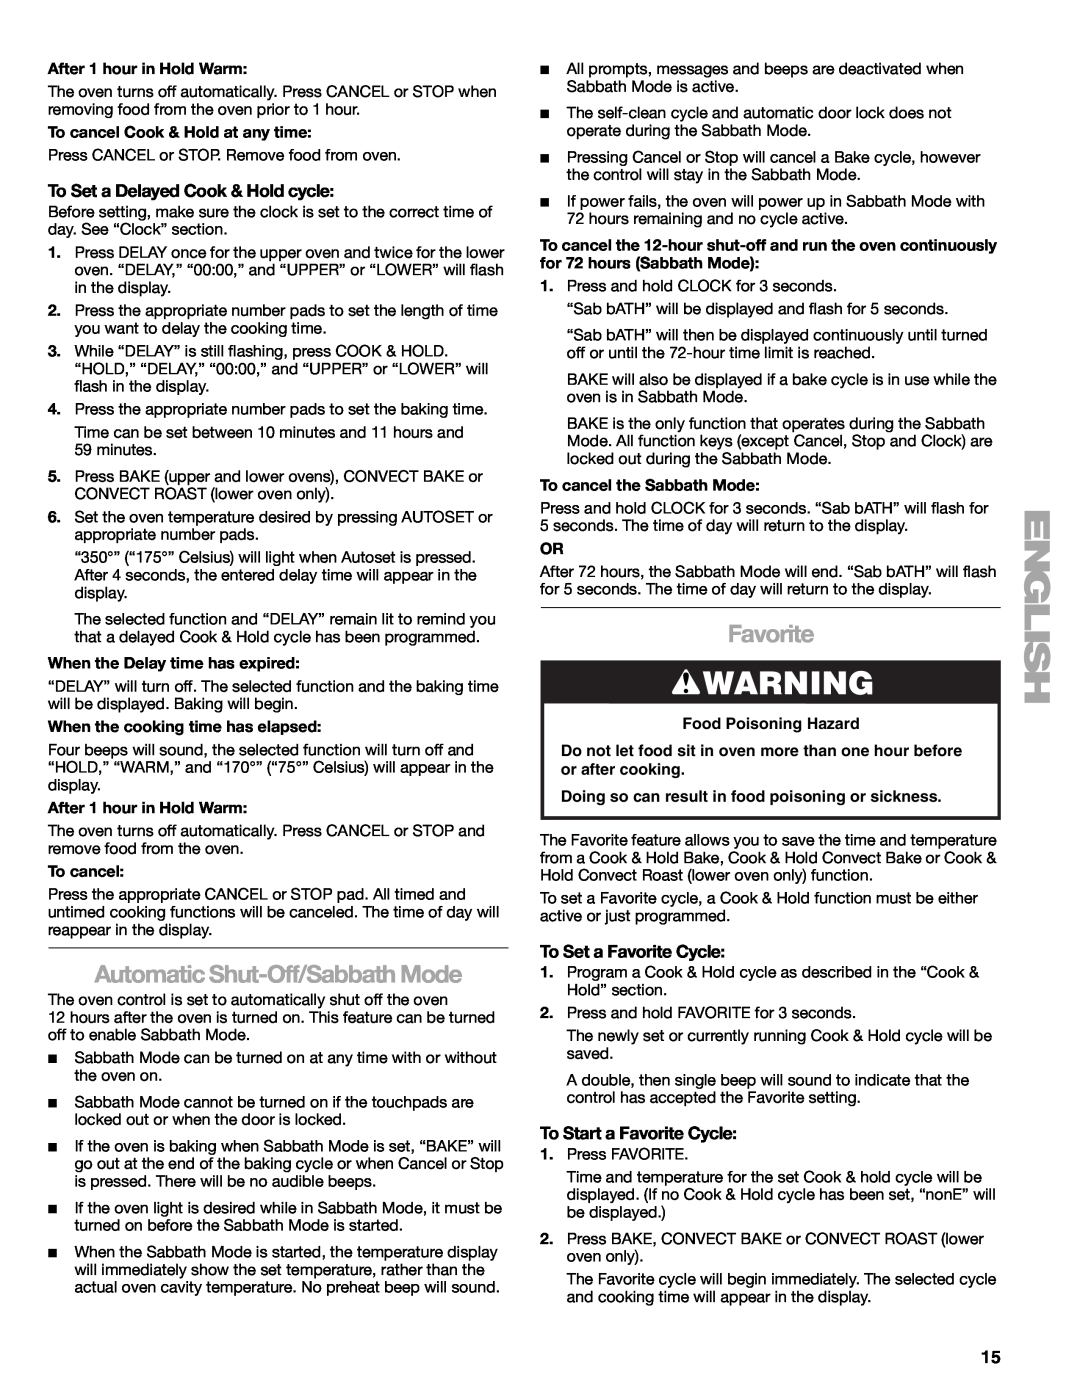 Kenmore 66578002700 manual Automatic Shut-Off/Sabbath Mode, To Set a Delayed Cook & Hold cycle, To Set a Favorite Cycle 